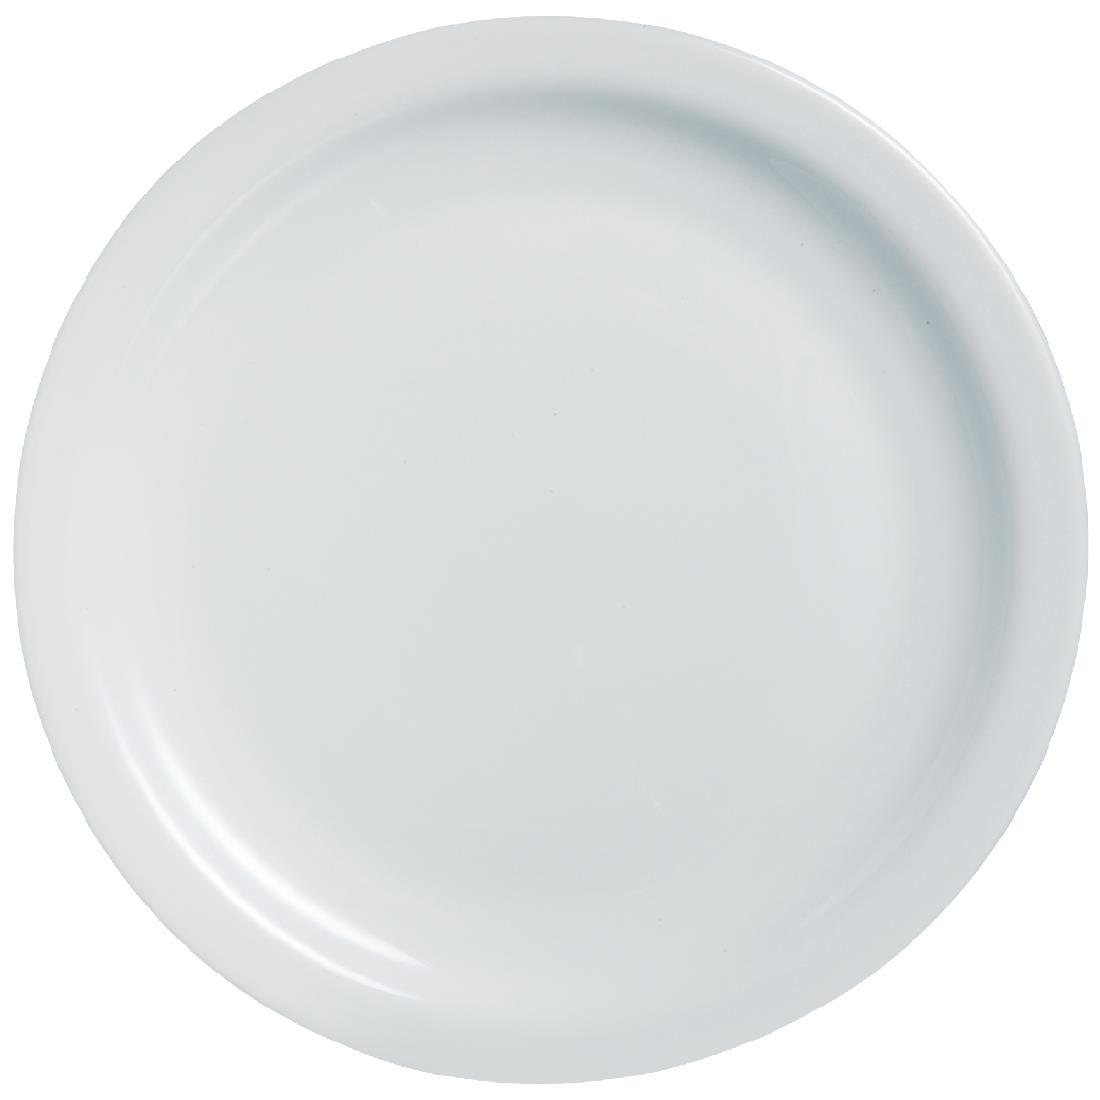 Arcoroc Opal Hoteliere Narrow Rim Plates 155mm (Pack of 6) - DP063  - 1